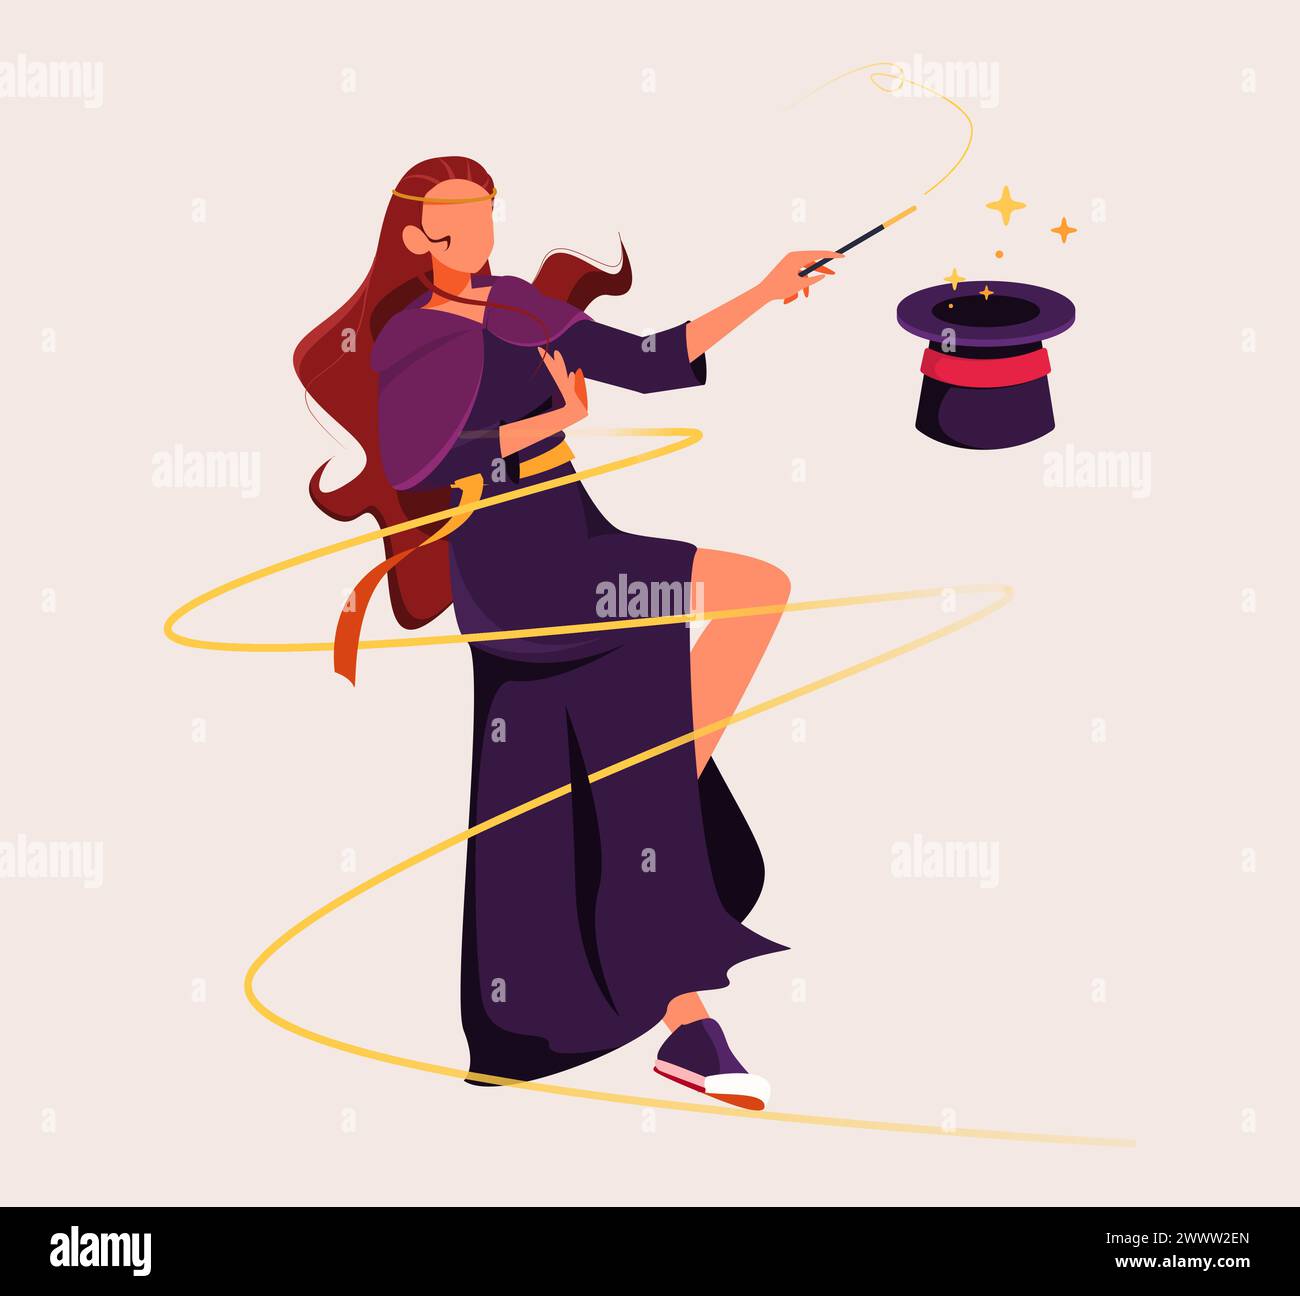 Female Magician Playing With Hat Vector Illustration, Woman Witch Wearing Purple Suit Robe Flat Design Stock Vector